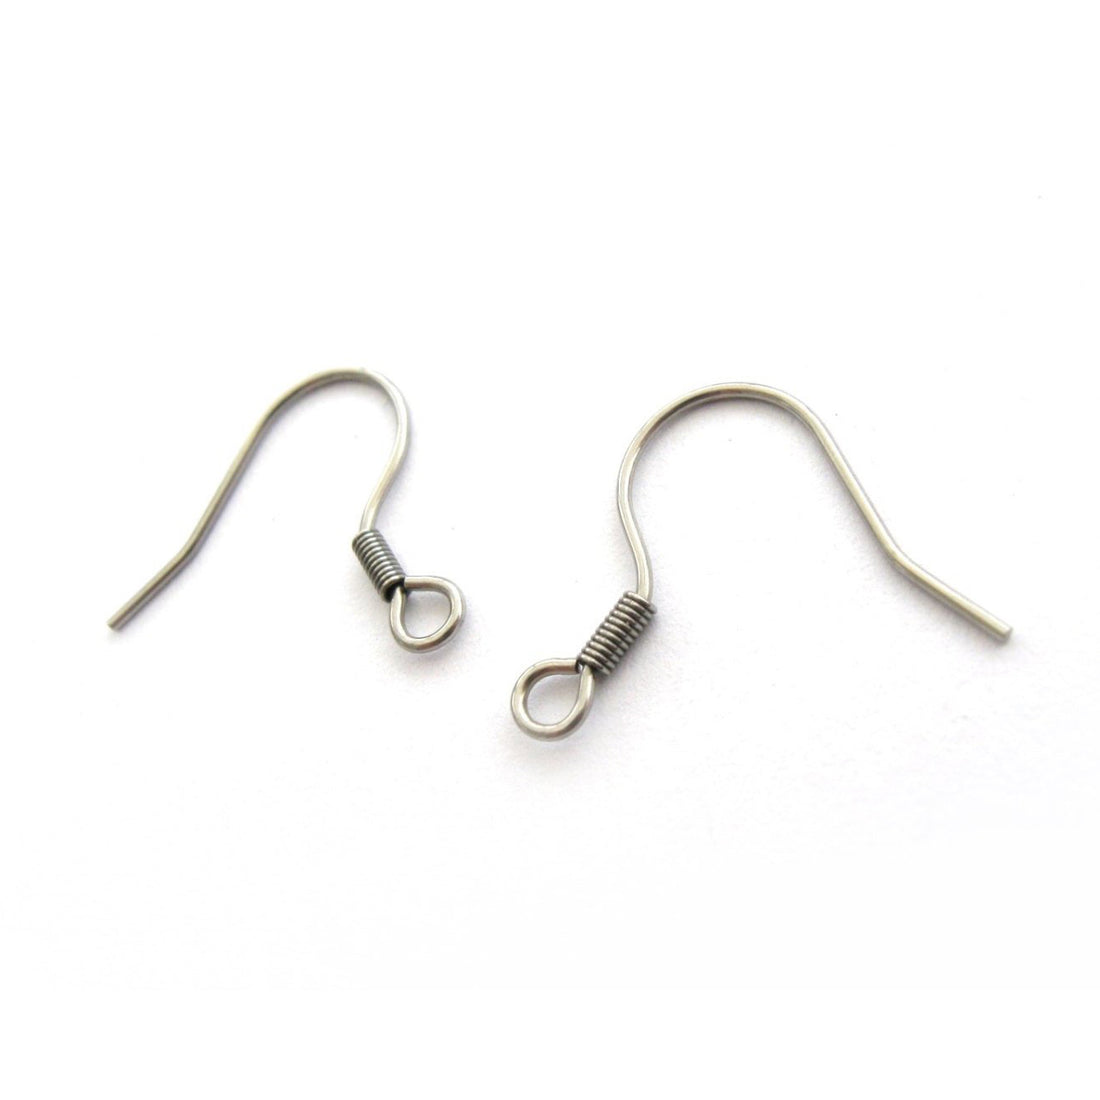 Surgical steel french earring hooks 50pcs (25 pairs) Hypoallergenic & Tarnish free